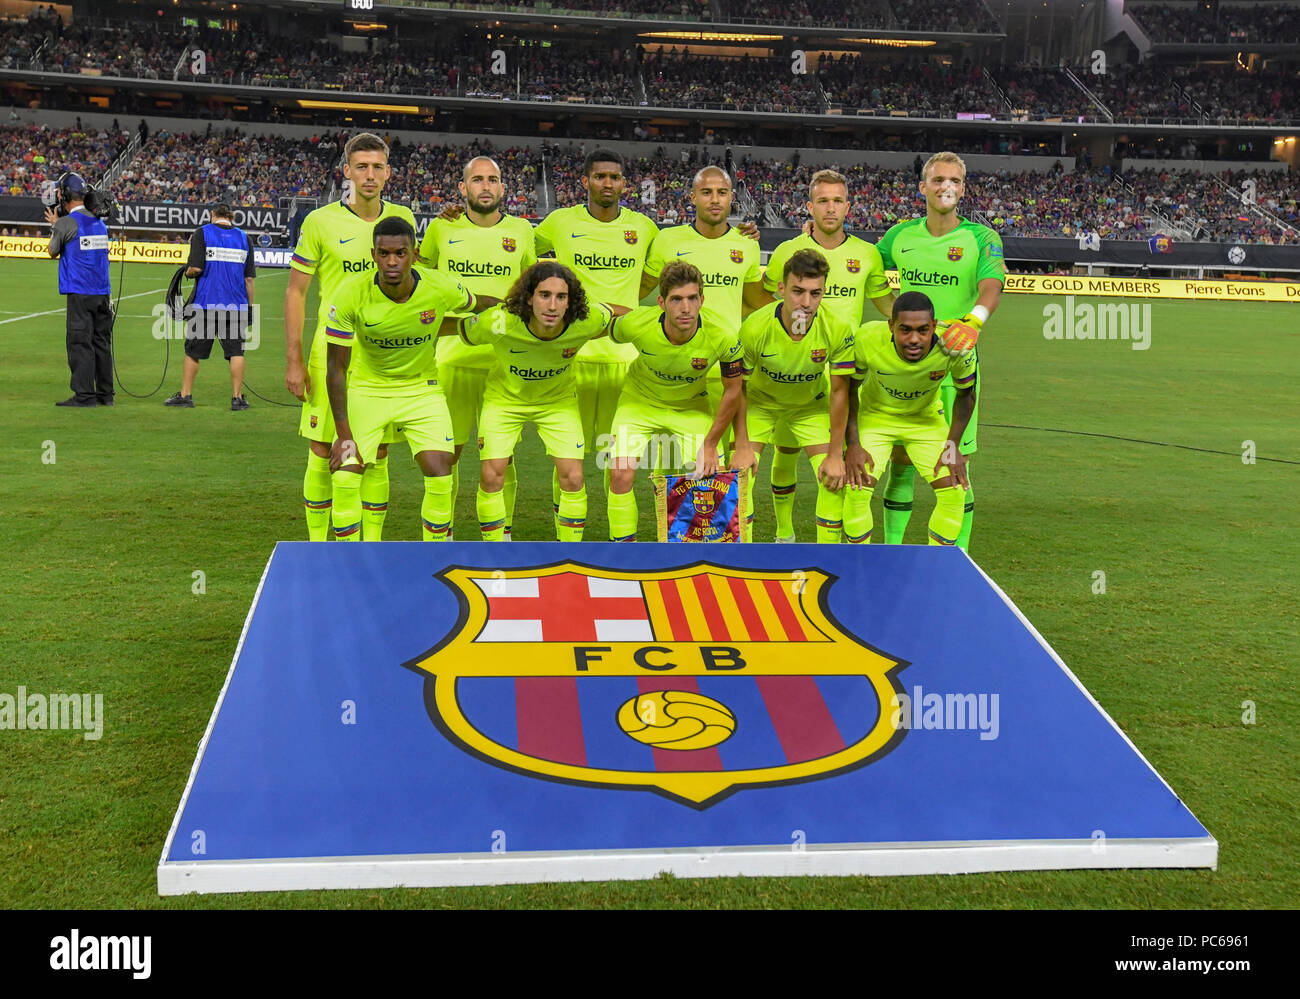 Jul 31, 2018: Futbal Club Barcelona pose for a team photo before an MLS  game between AS Roma and FC Barcelona at AT&T Stadium in Arlington, TX AS  Roma defeated FC Barcelona